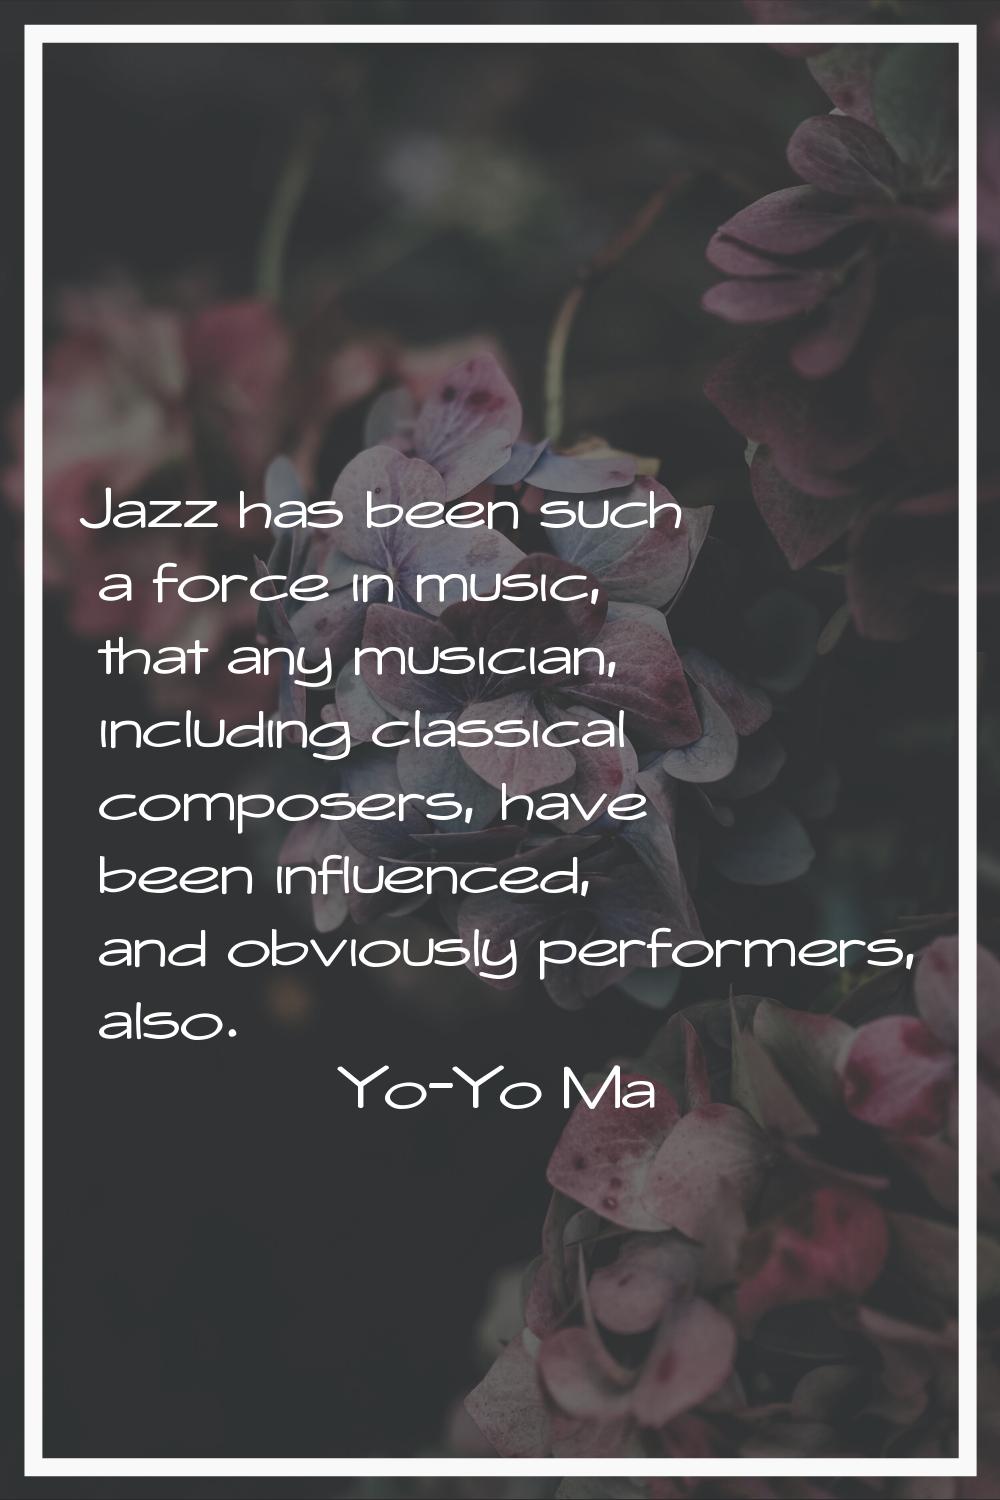 Jazz has been such a force in music, that any musician, including classical composers, have been in